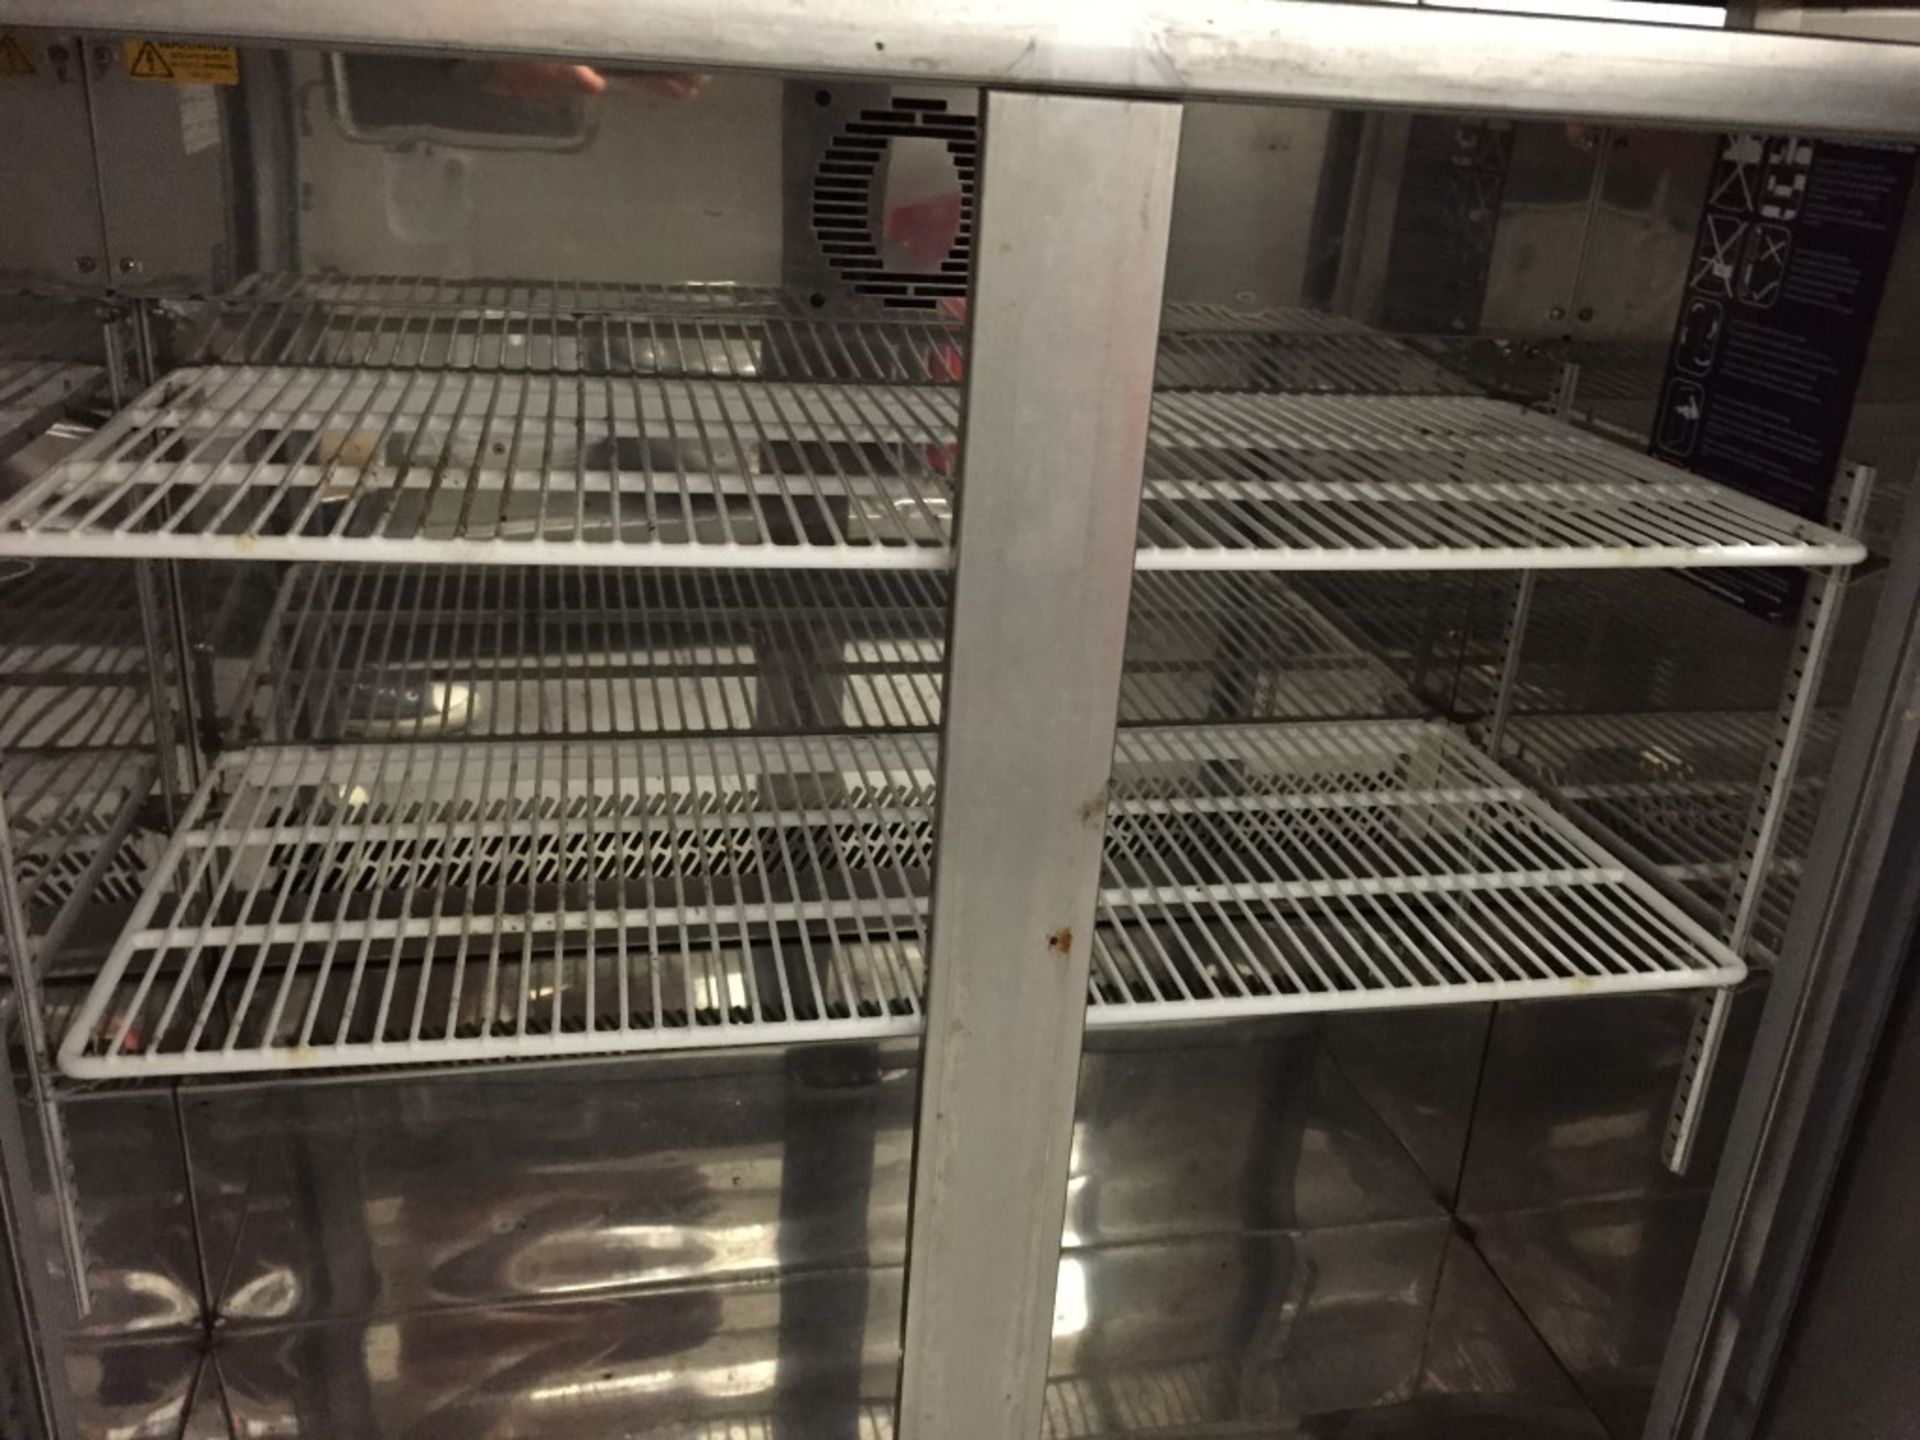 1 x Williams Two Door Commercial Stainless Steel Chiller - Model BC2 SS R1 - 240v -H89 x W89 x D51 - Image 4 of 5